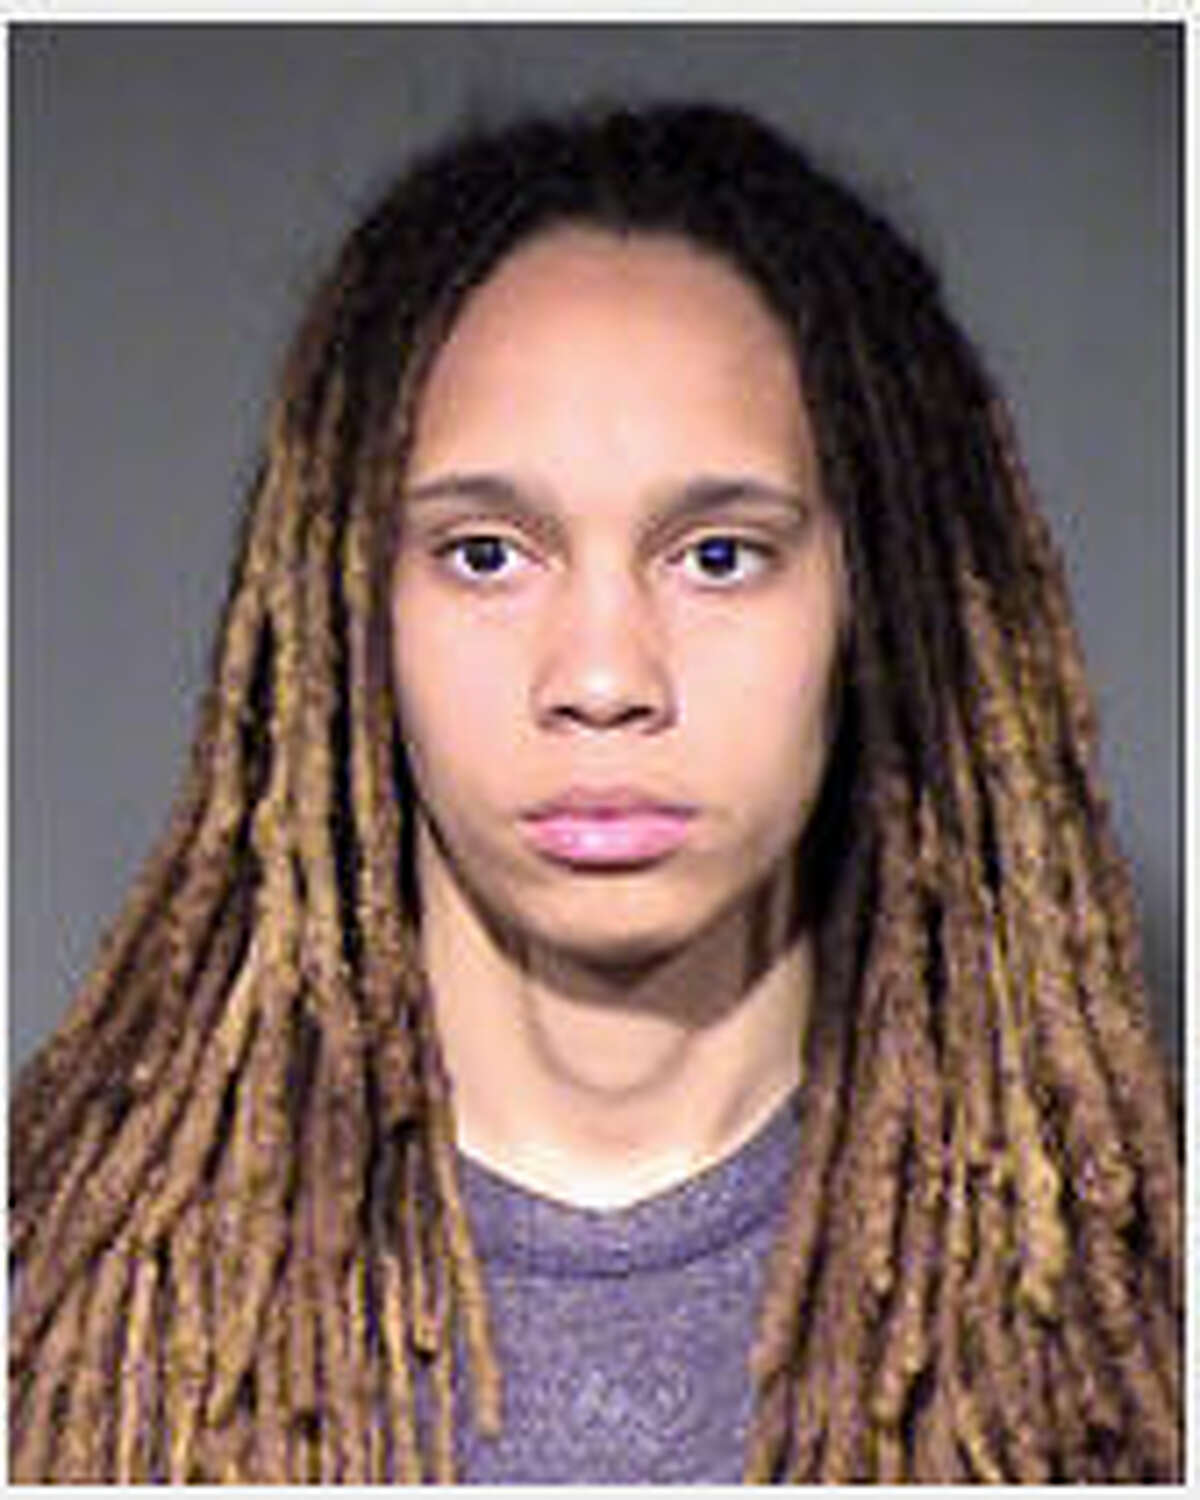 A booking photo of WNBA player Brittney Griner. She and her fiancee Glory Johnson were arrested Wednesday, April 22, 2015, on suspicion of assault and disorderly conduct following a fight at their home in a Phoenix suburb. The two 24-year-olds were booked into jail in Phoenix following their arrests and later released. The pair announced their engagement late last summer. (Maricopa County Sheriff's Office)